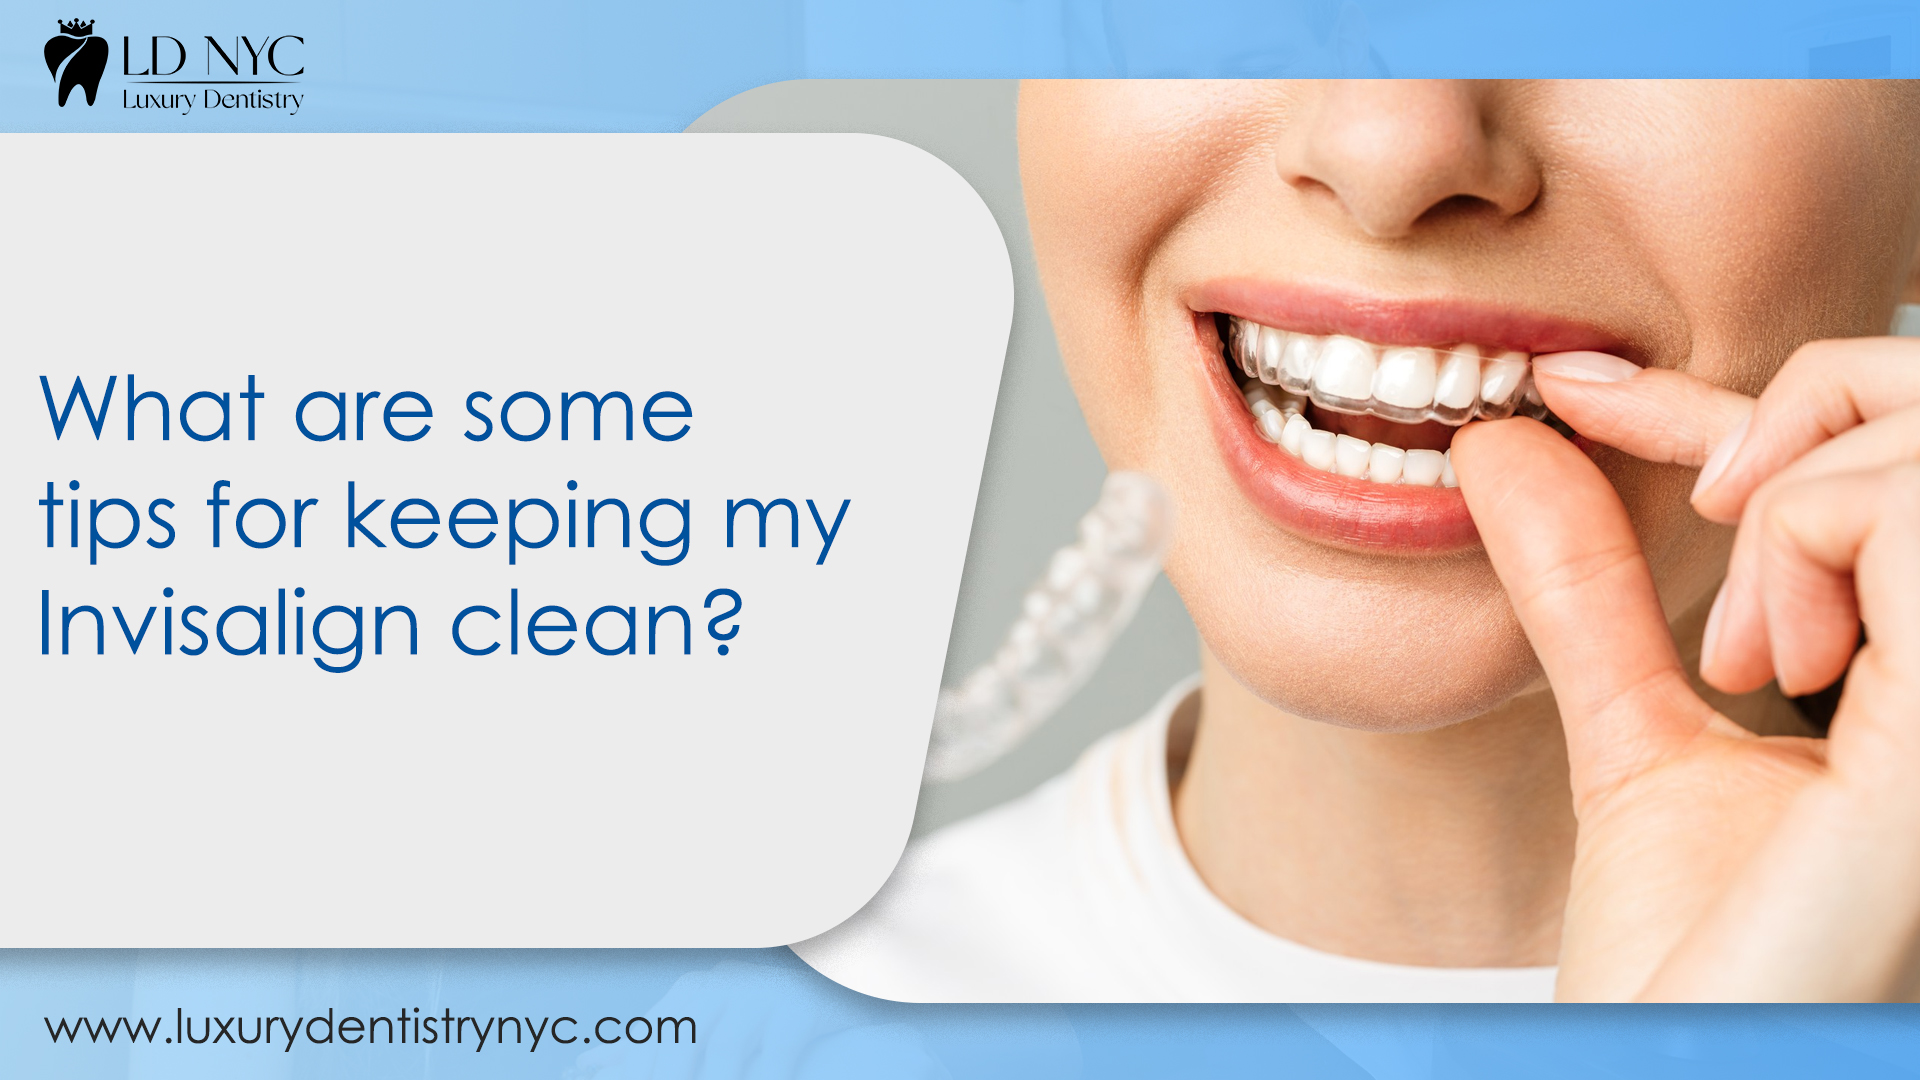 Tips for Cleaning Invisalign